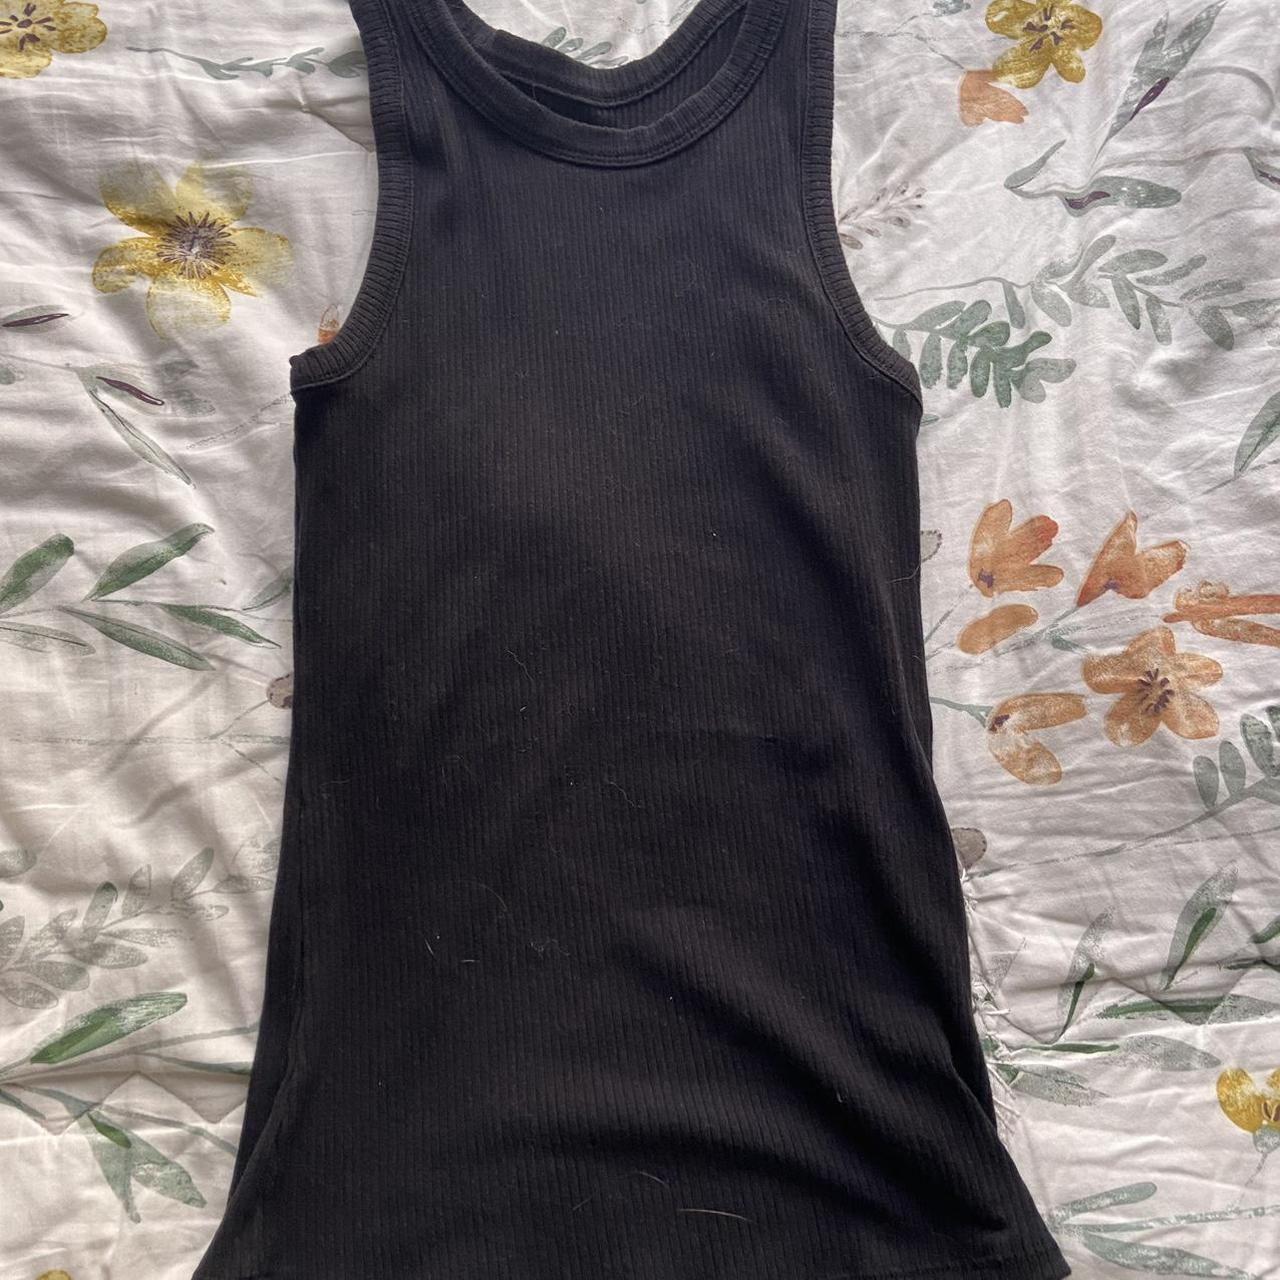 Skin tight Maurice’s black tank ACCEPTING ALL... - Depop